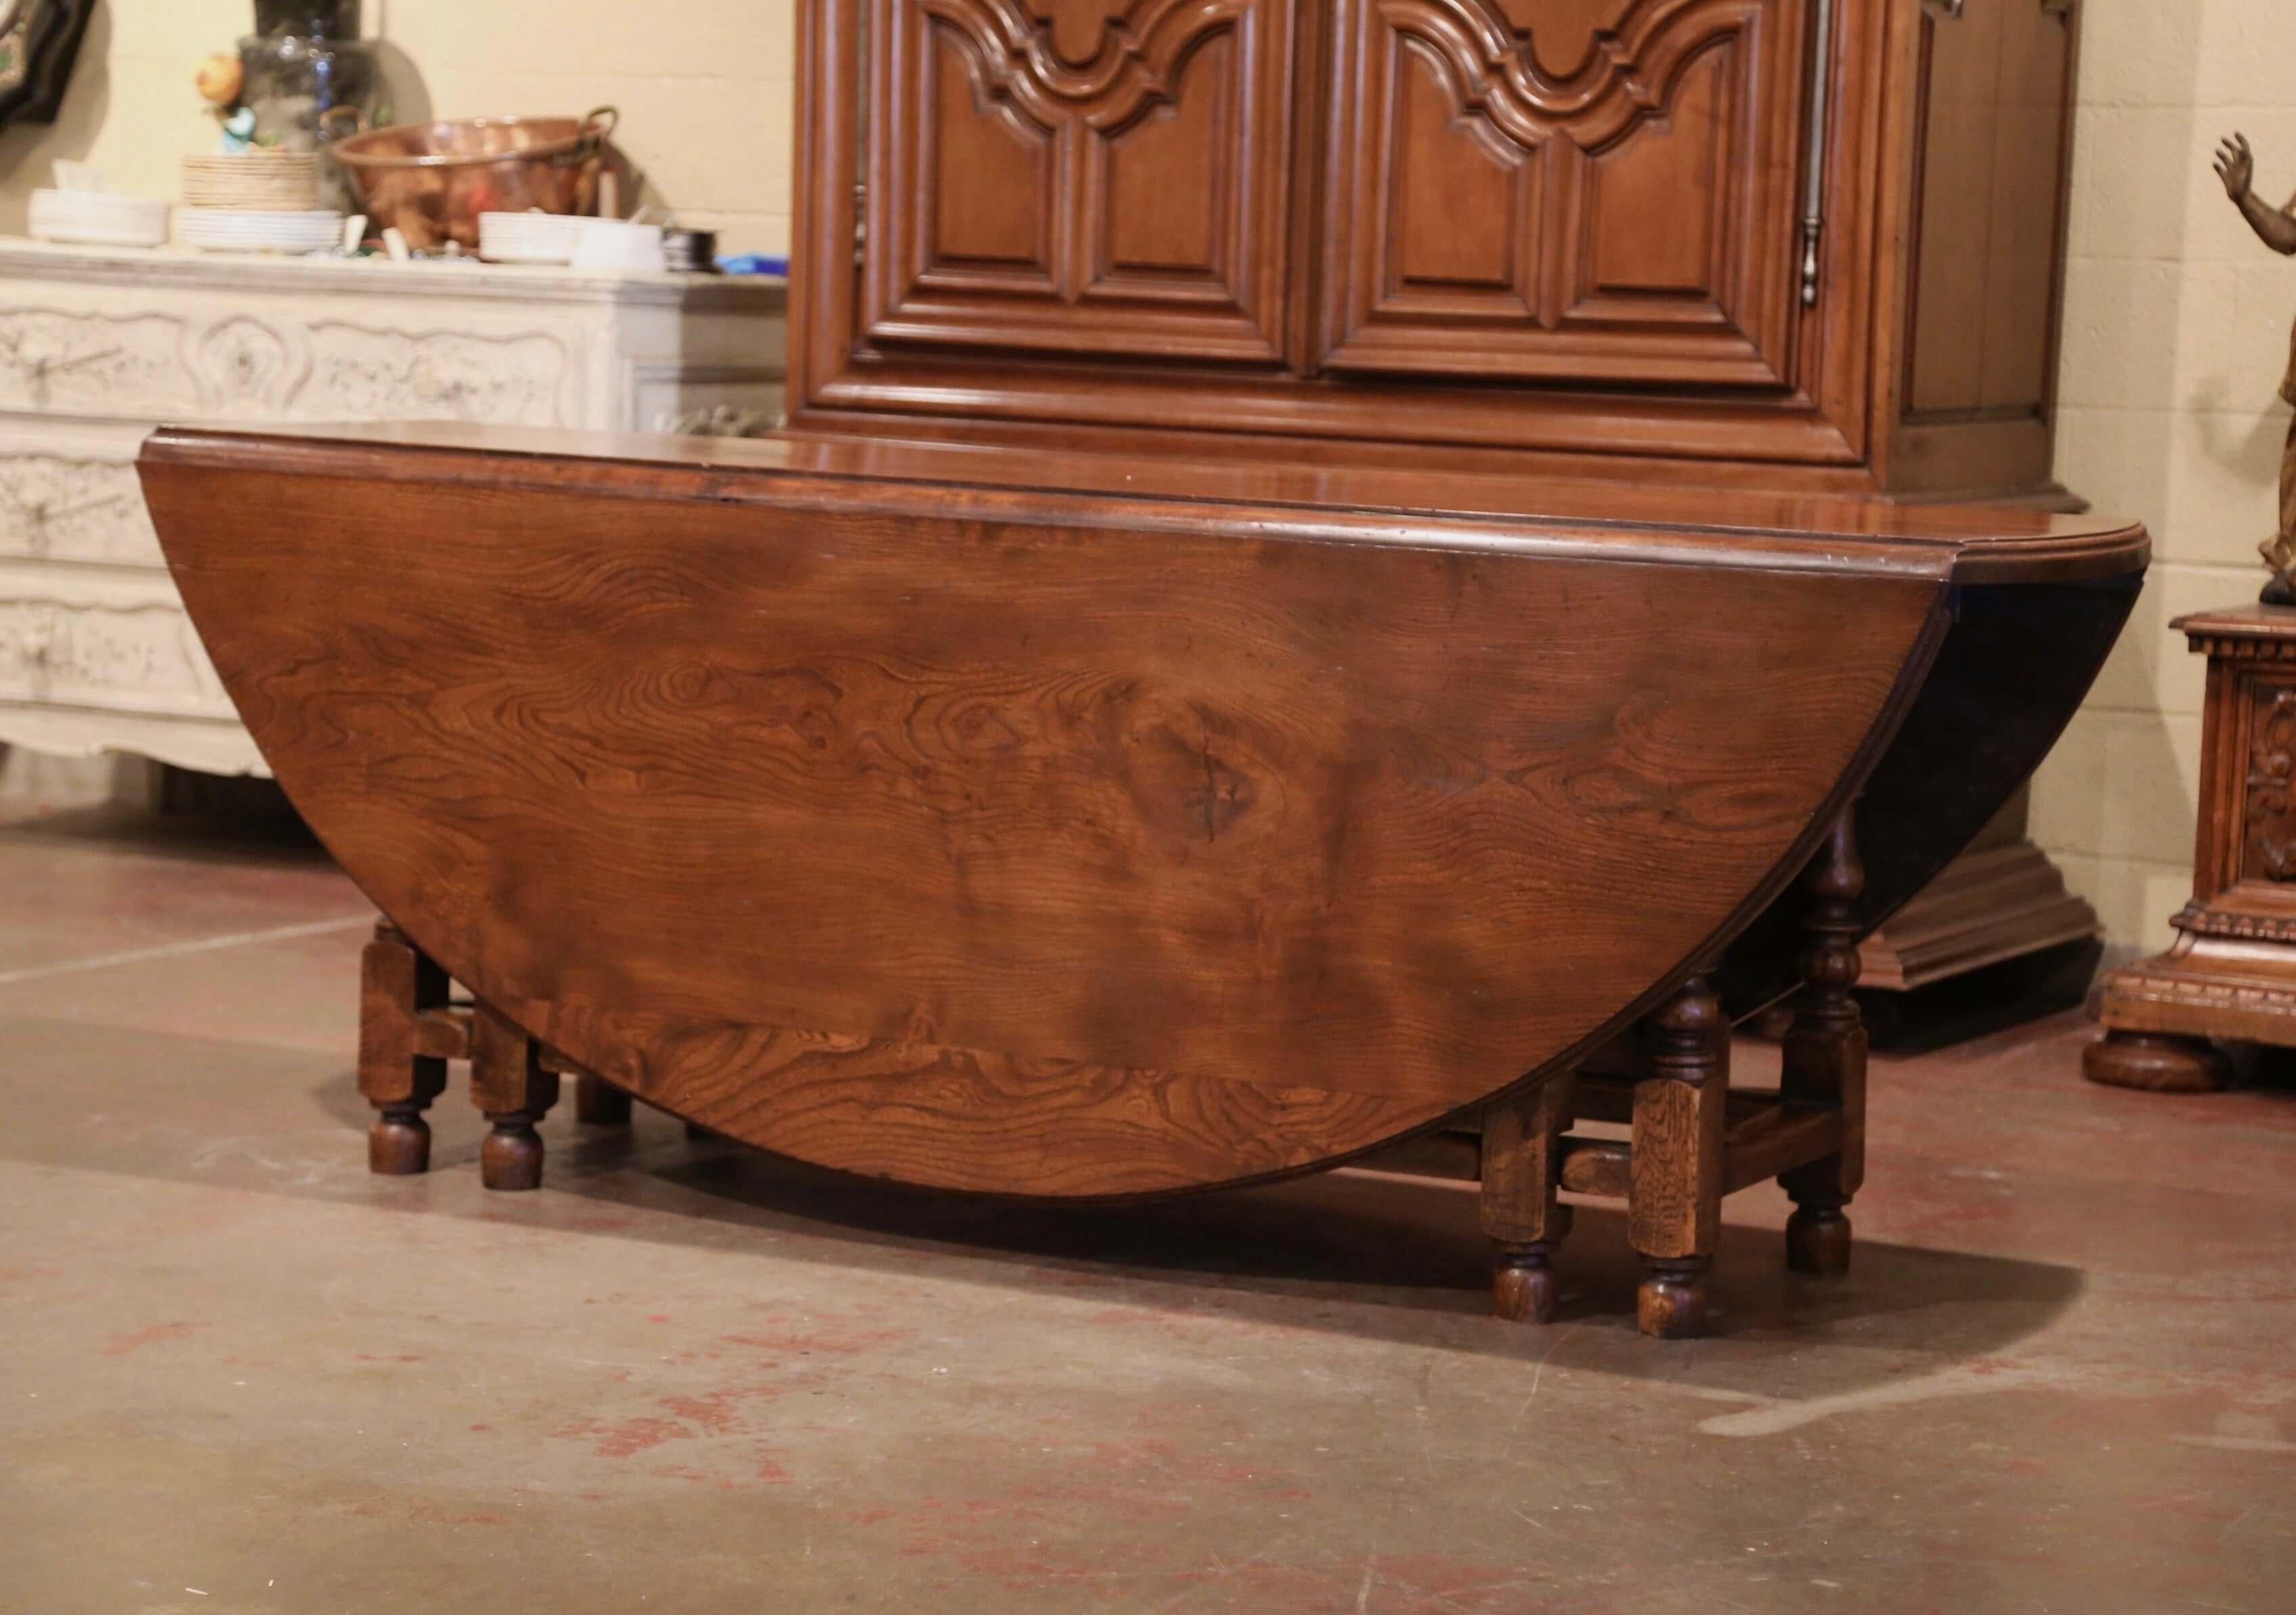 Midcentury English Carved Chestnut Eight Gate-Leg Drop-Leaf Oval Table In Excellent Condition For Sale In Dallas, TX